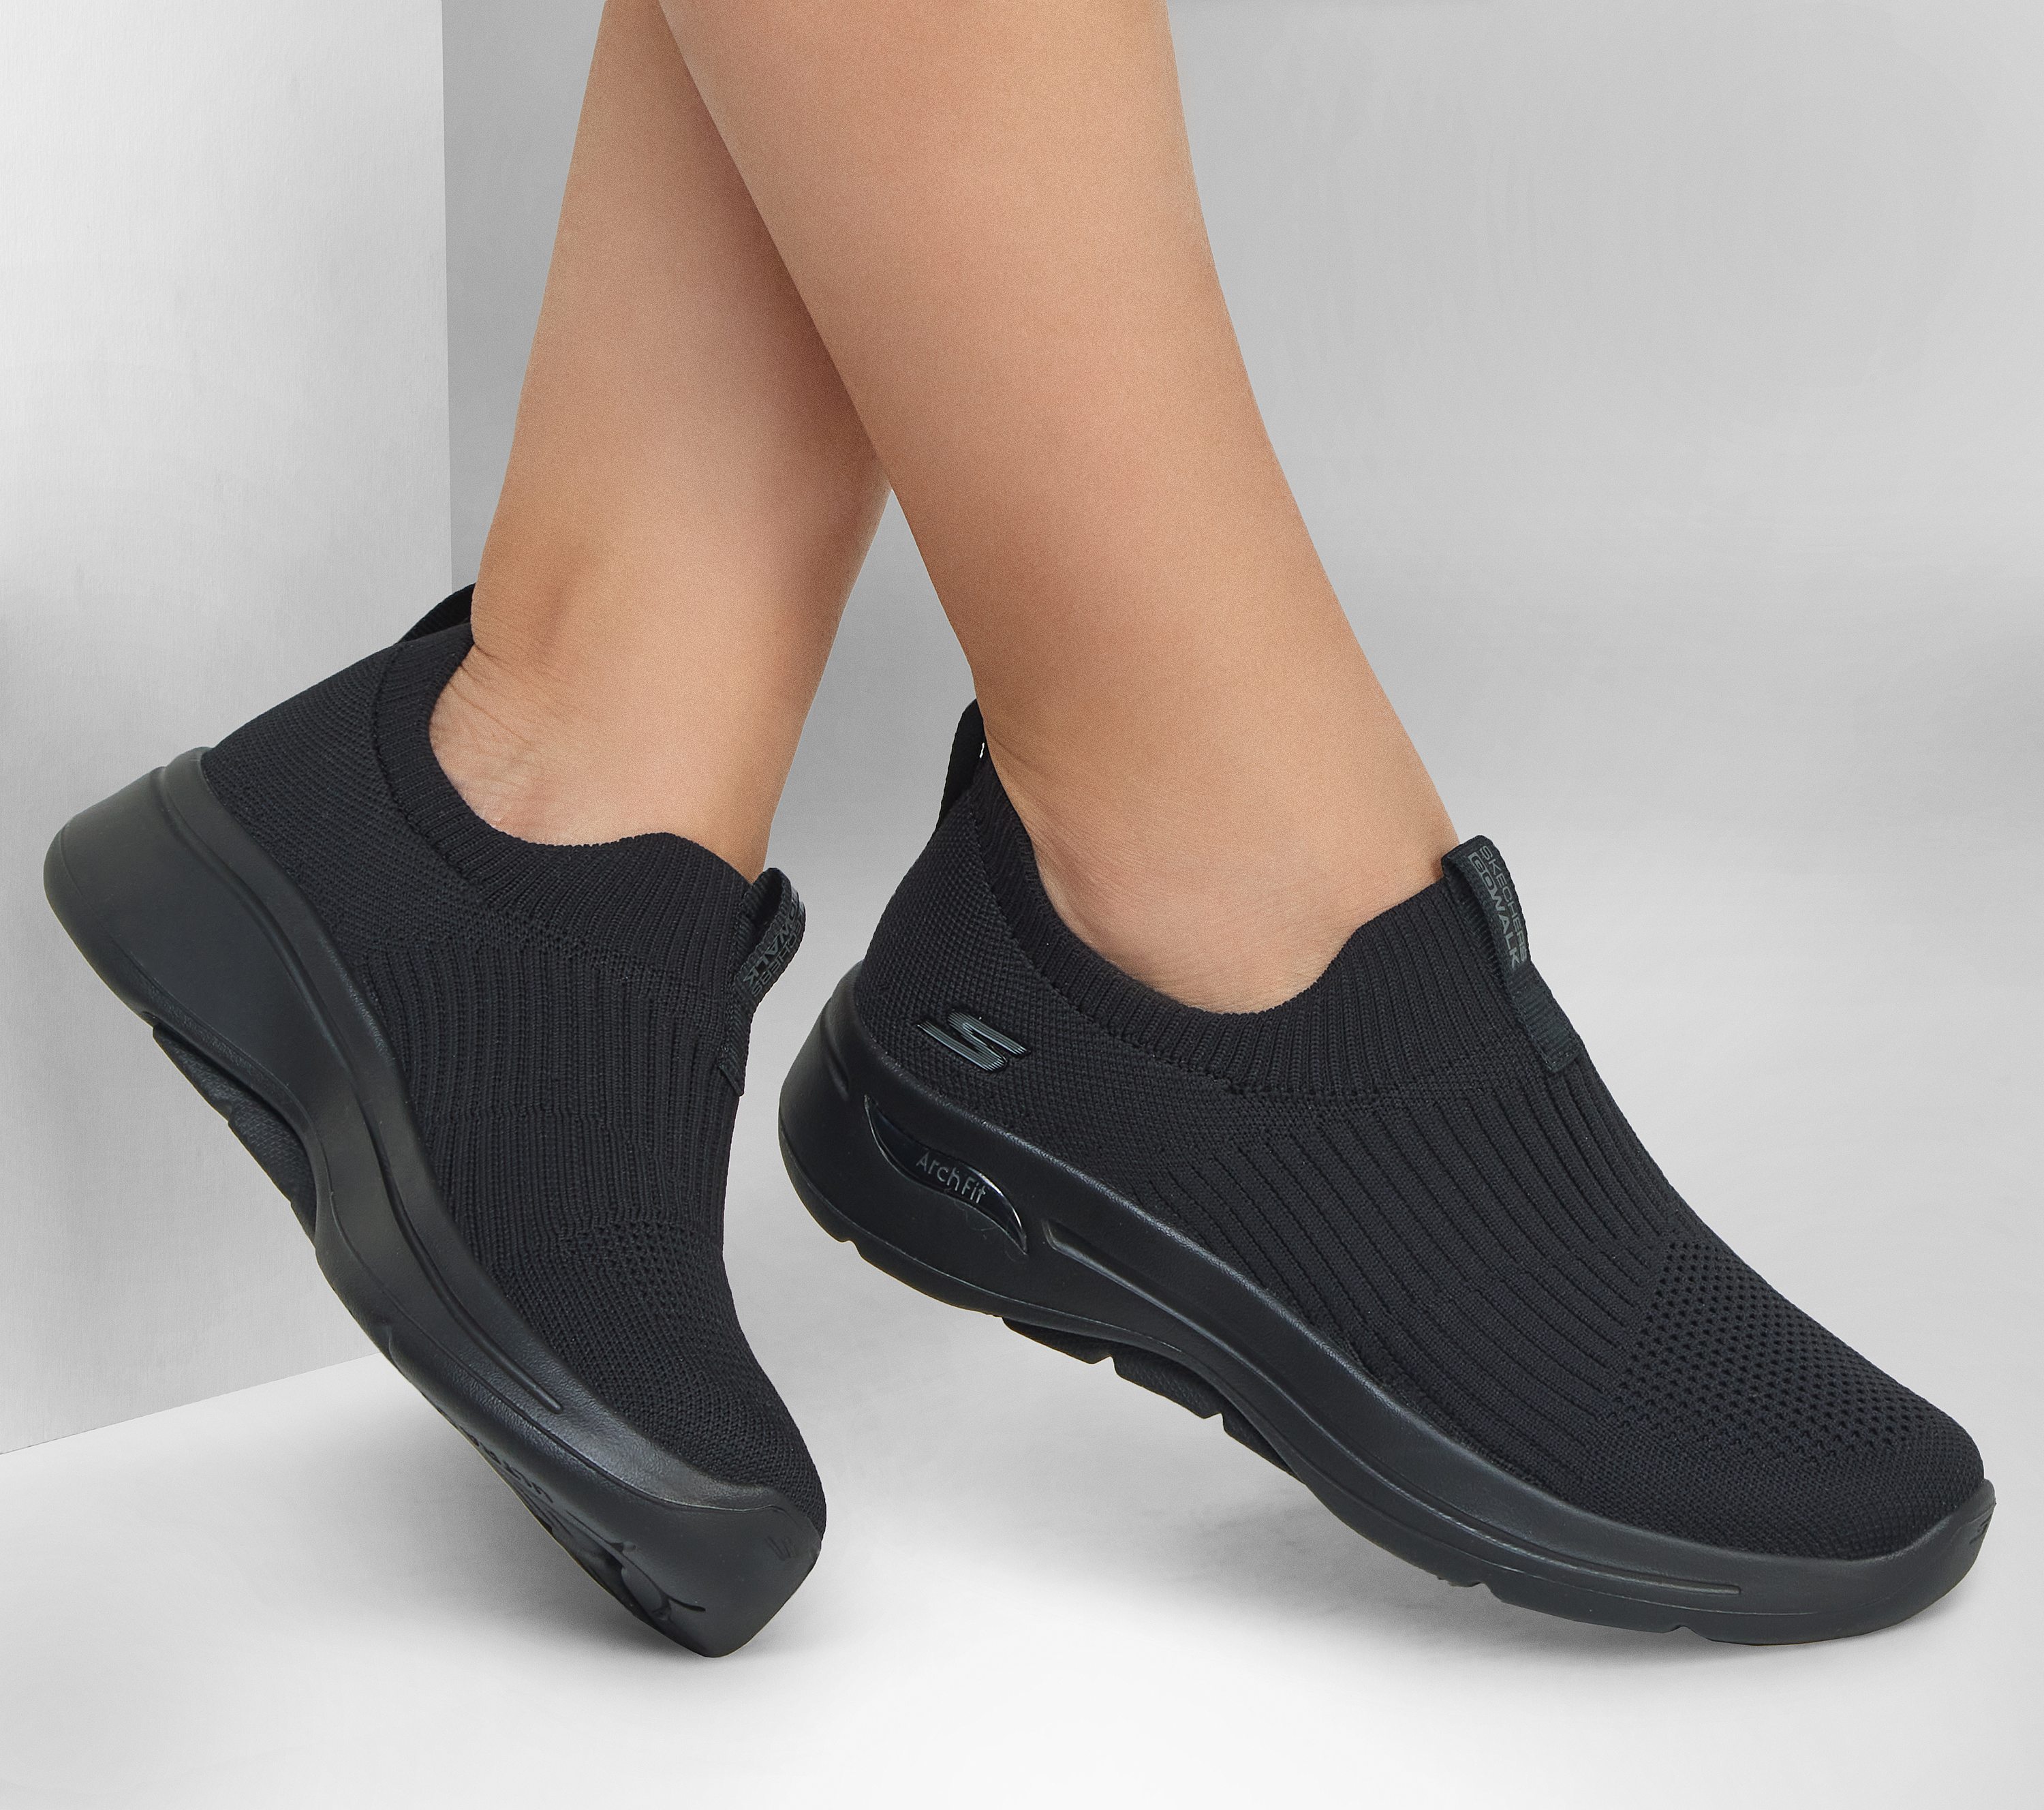 Shop the Skechers GO WALK Arch Fit - Iconic